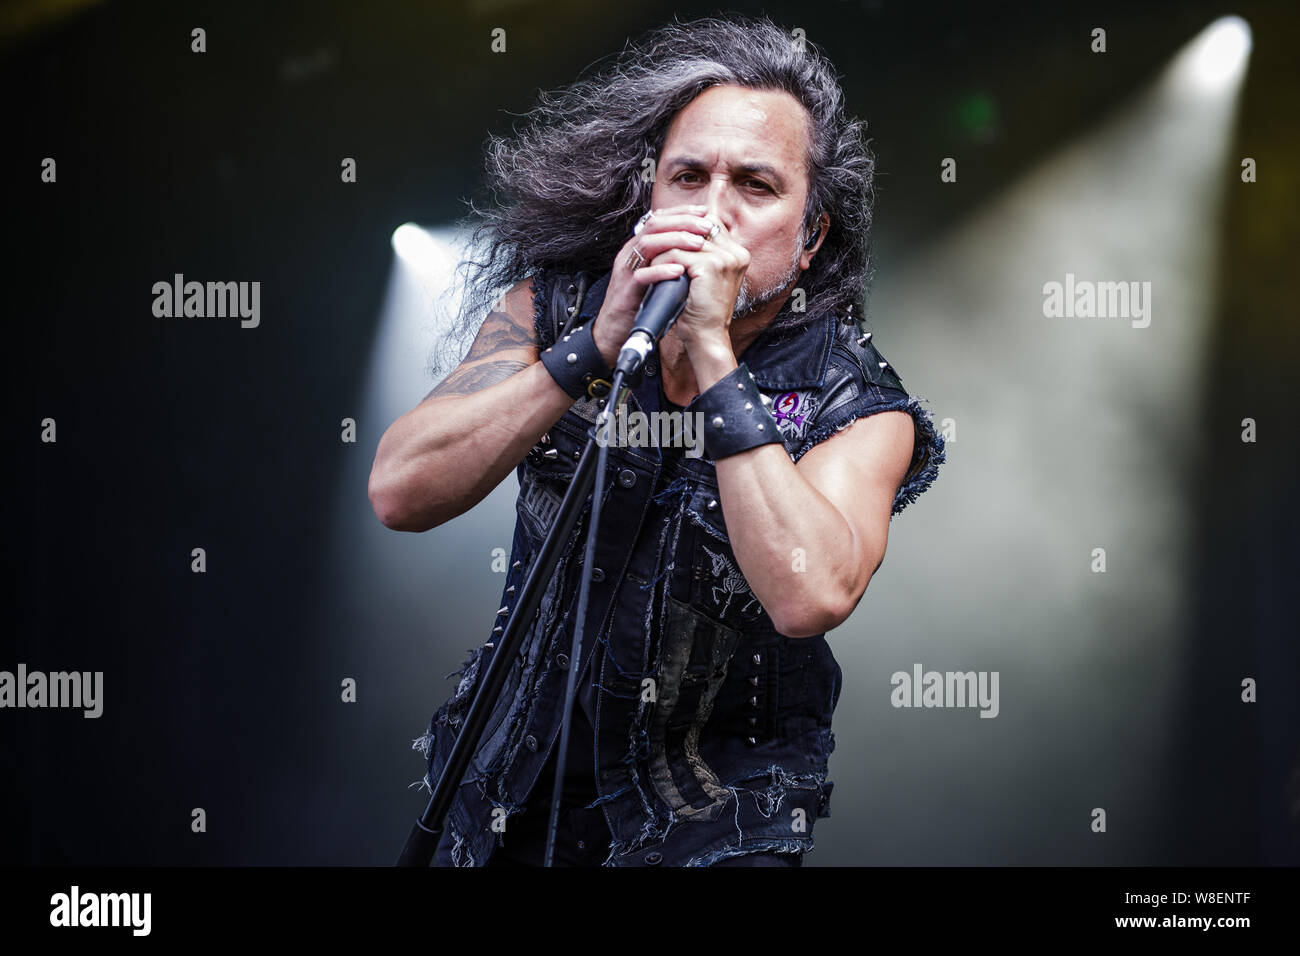 Death Angel perform live on stage at Bloodstock Open Air Festival, UK, 9th Aug, 2019. Stock Photo